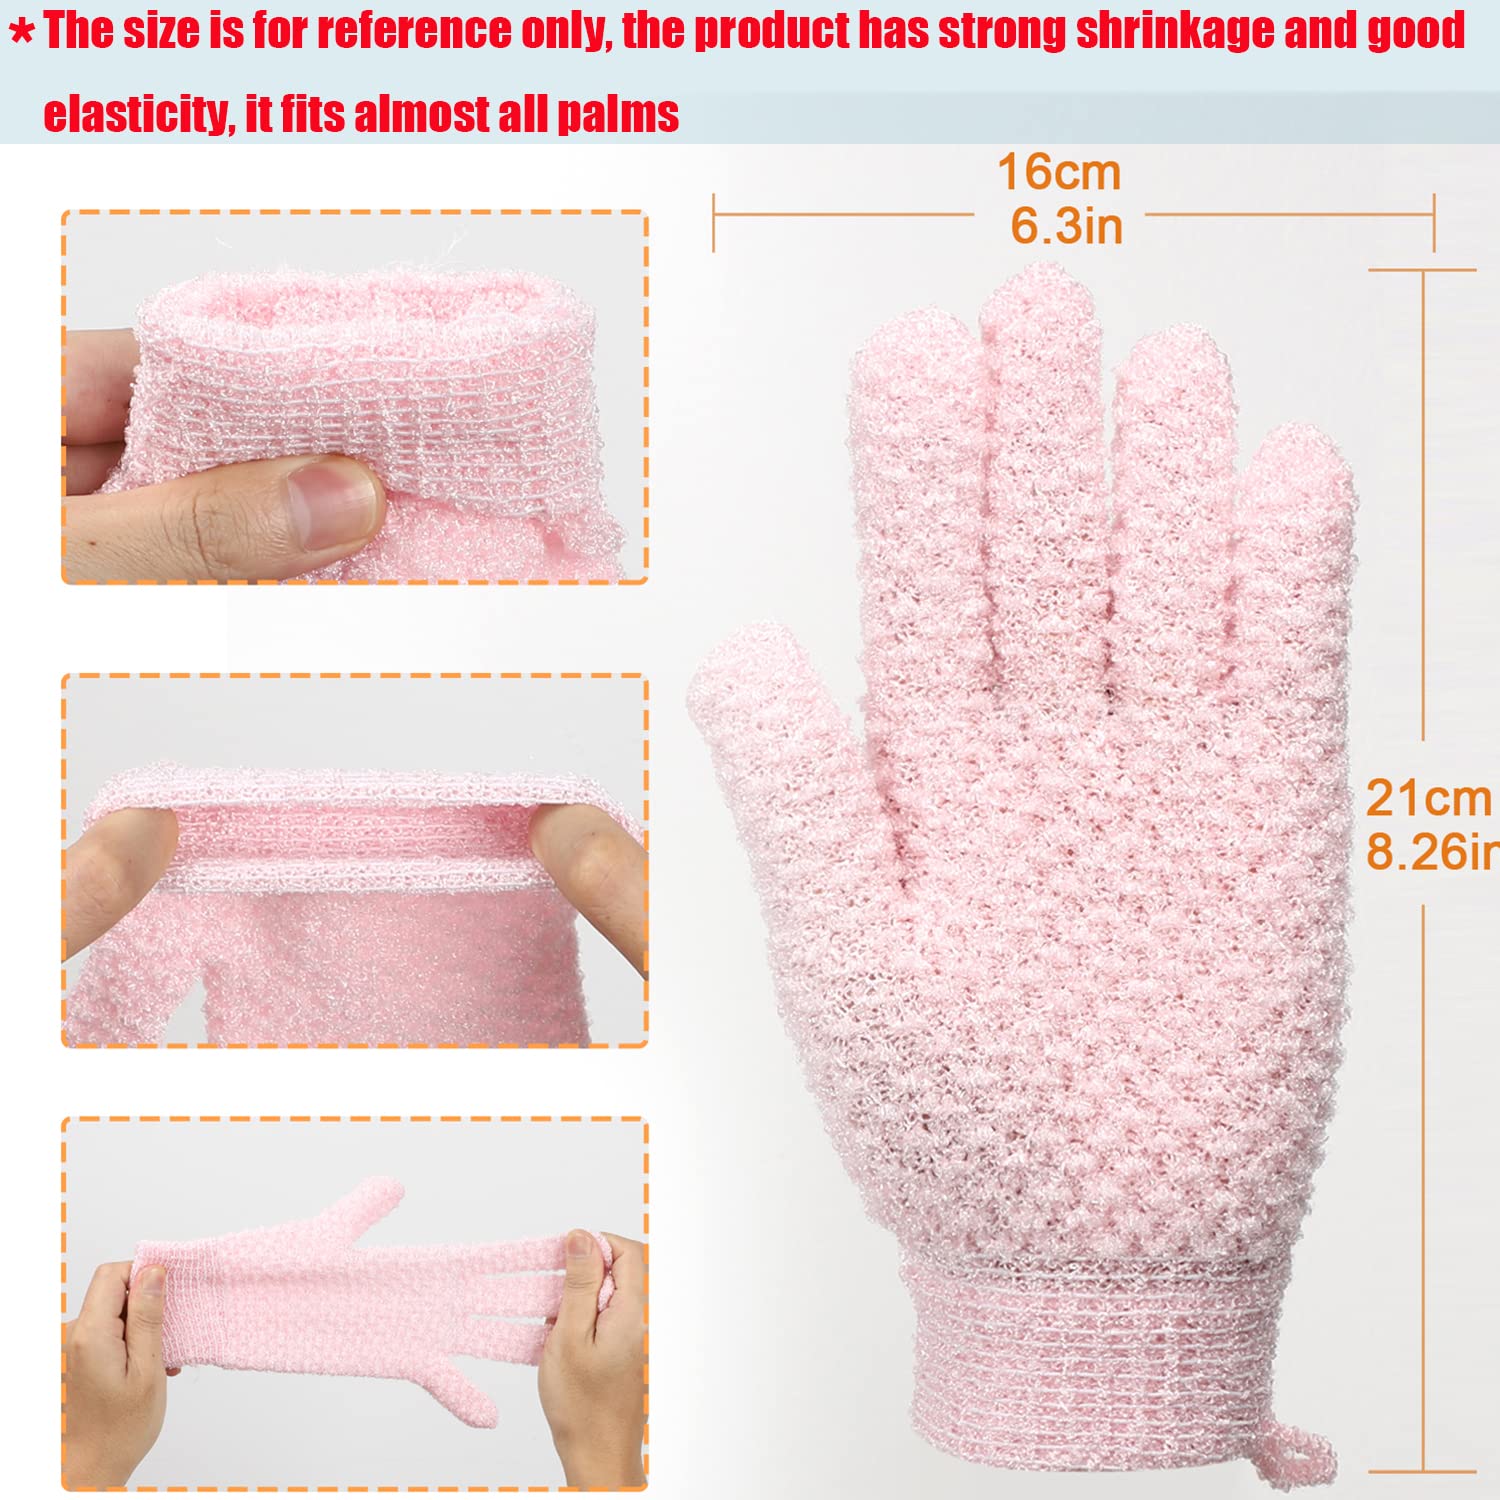 Bath Exfoliating Gloves for Shower,JASSINS Thick Soft Double Exfoliating Shower Gloves,Dead Skin Cell Remover Bathing Supplies,1Pair(Pink)